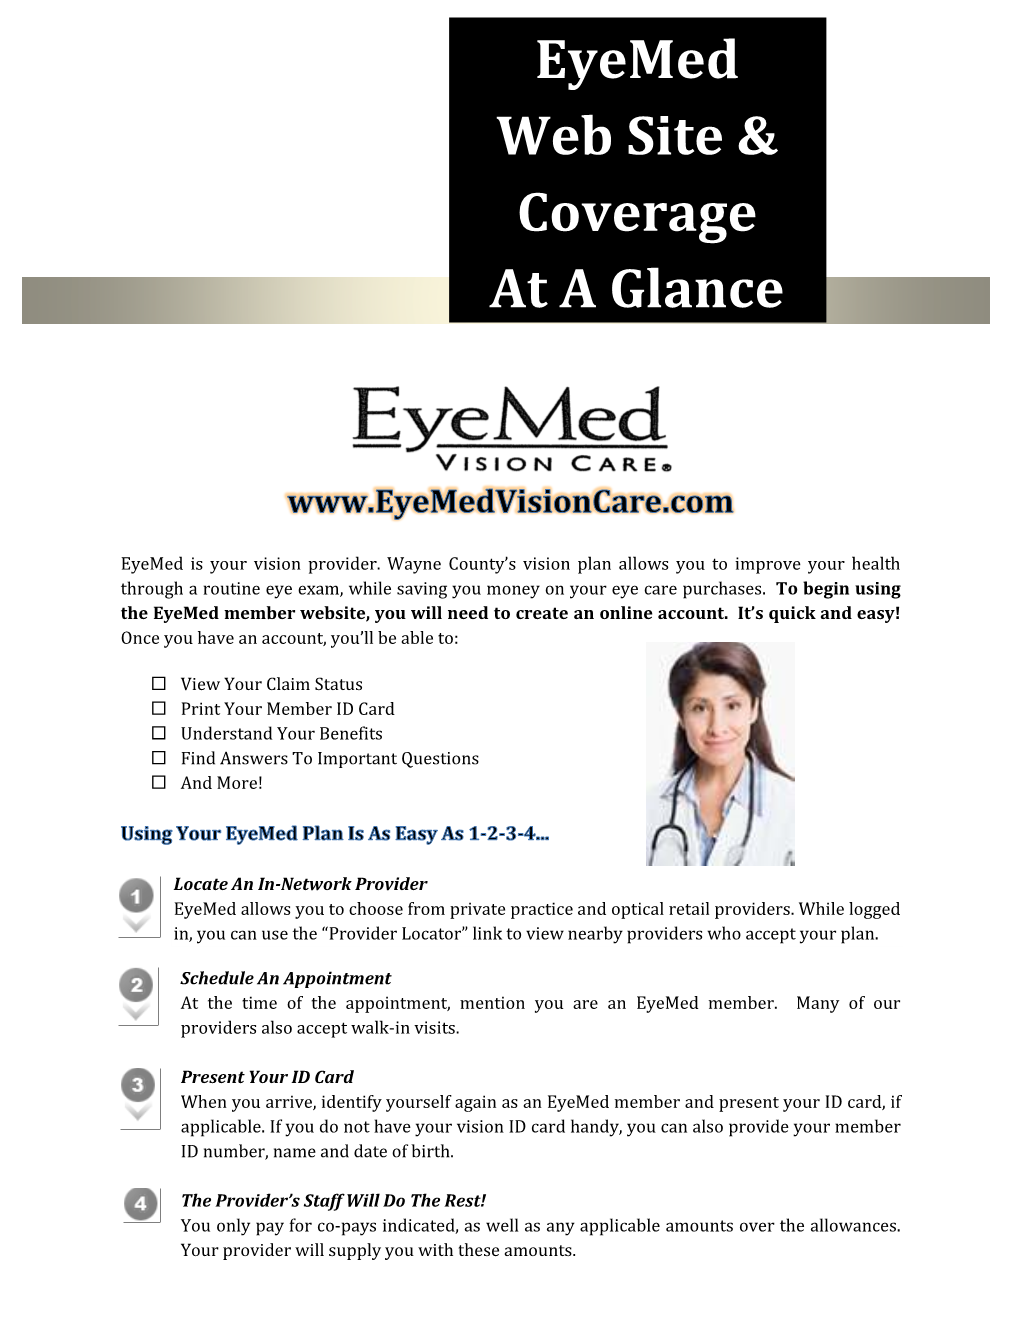 Eyemed Web Site & Coverage at a Glance